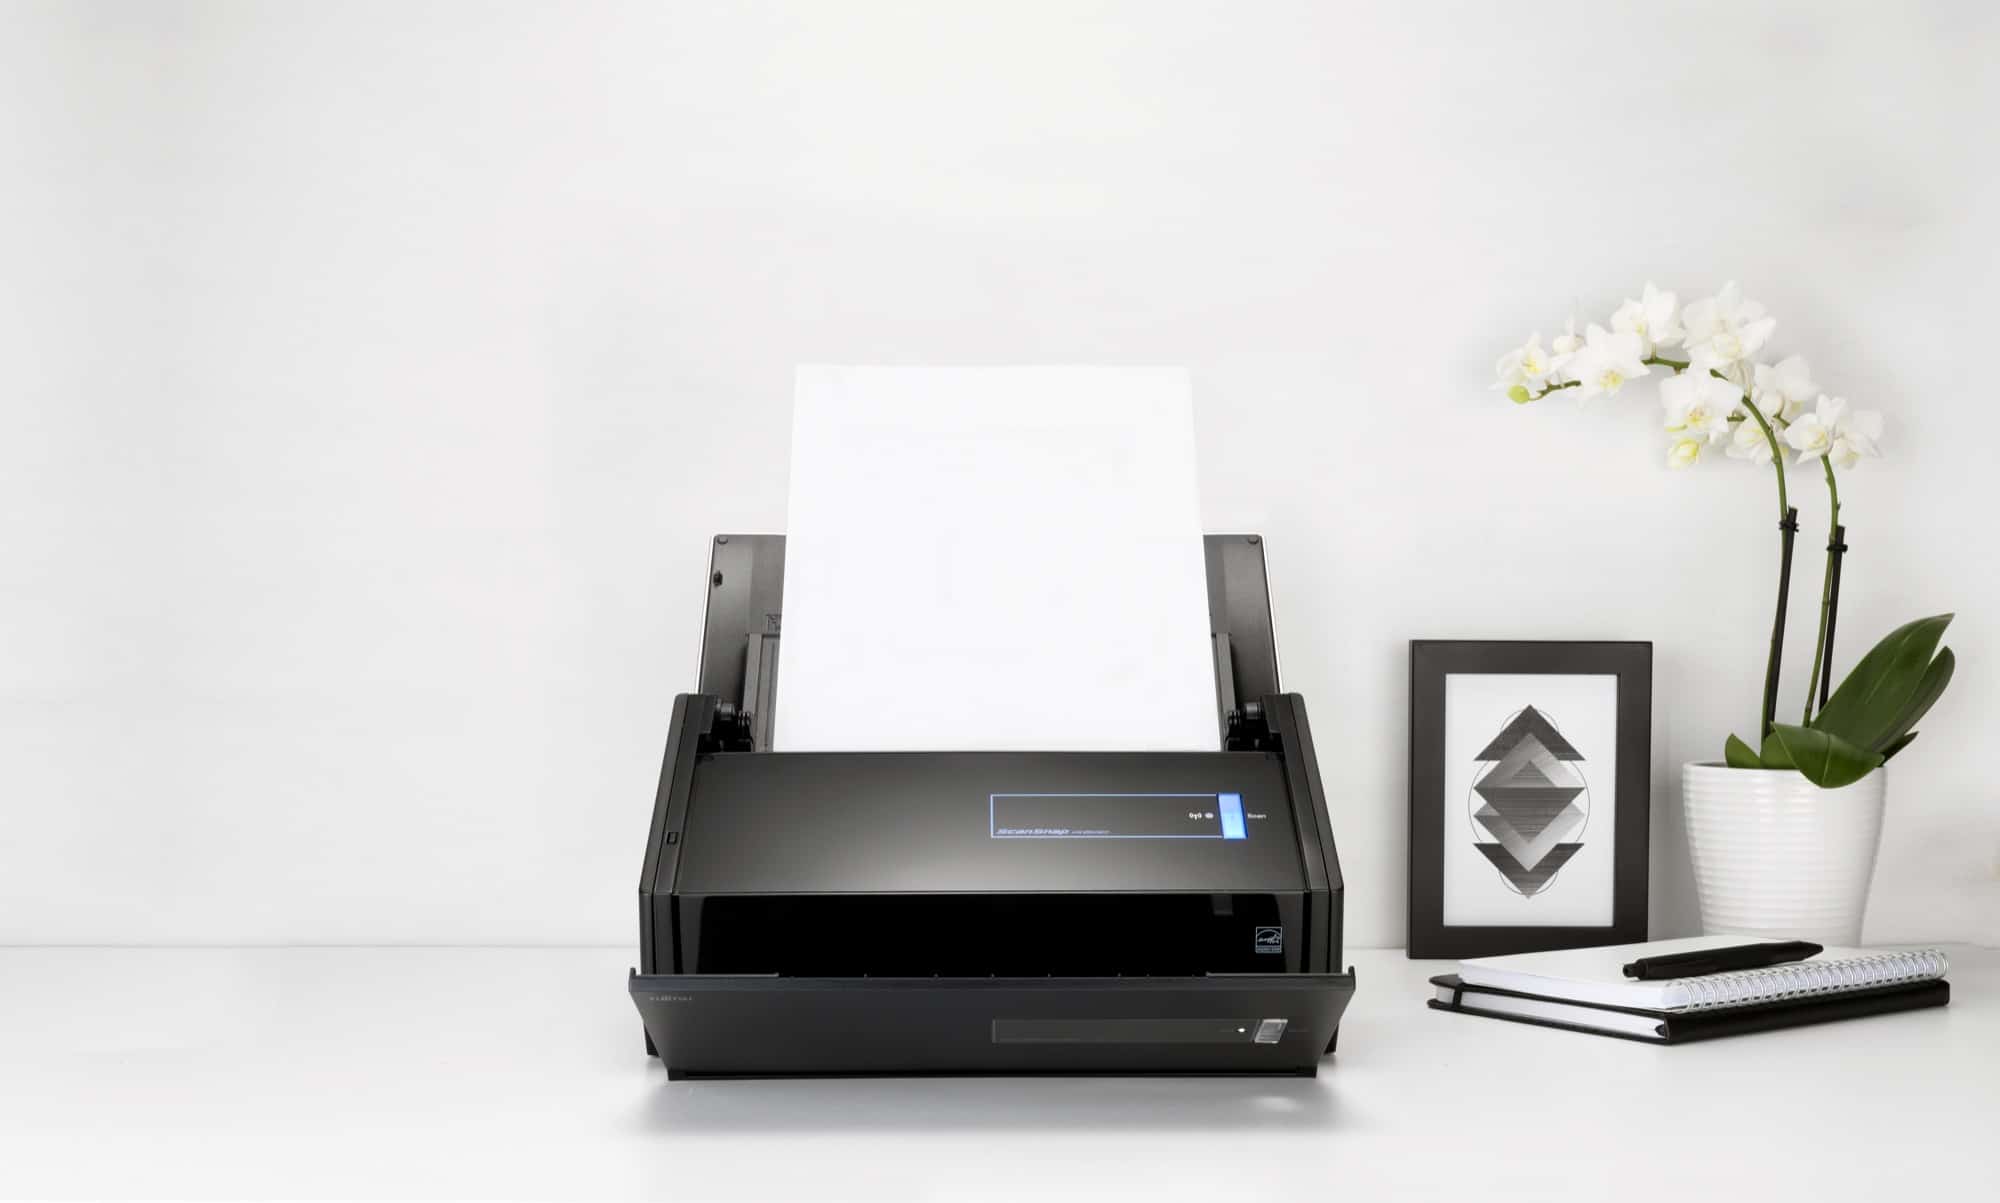 ScanSnap ix500 scanner with paper feeding through at the top